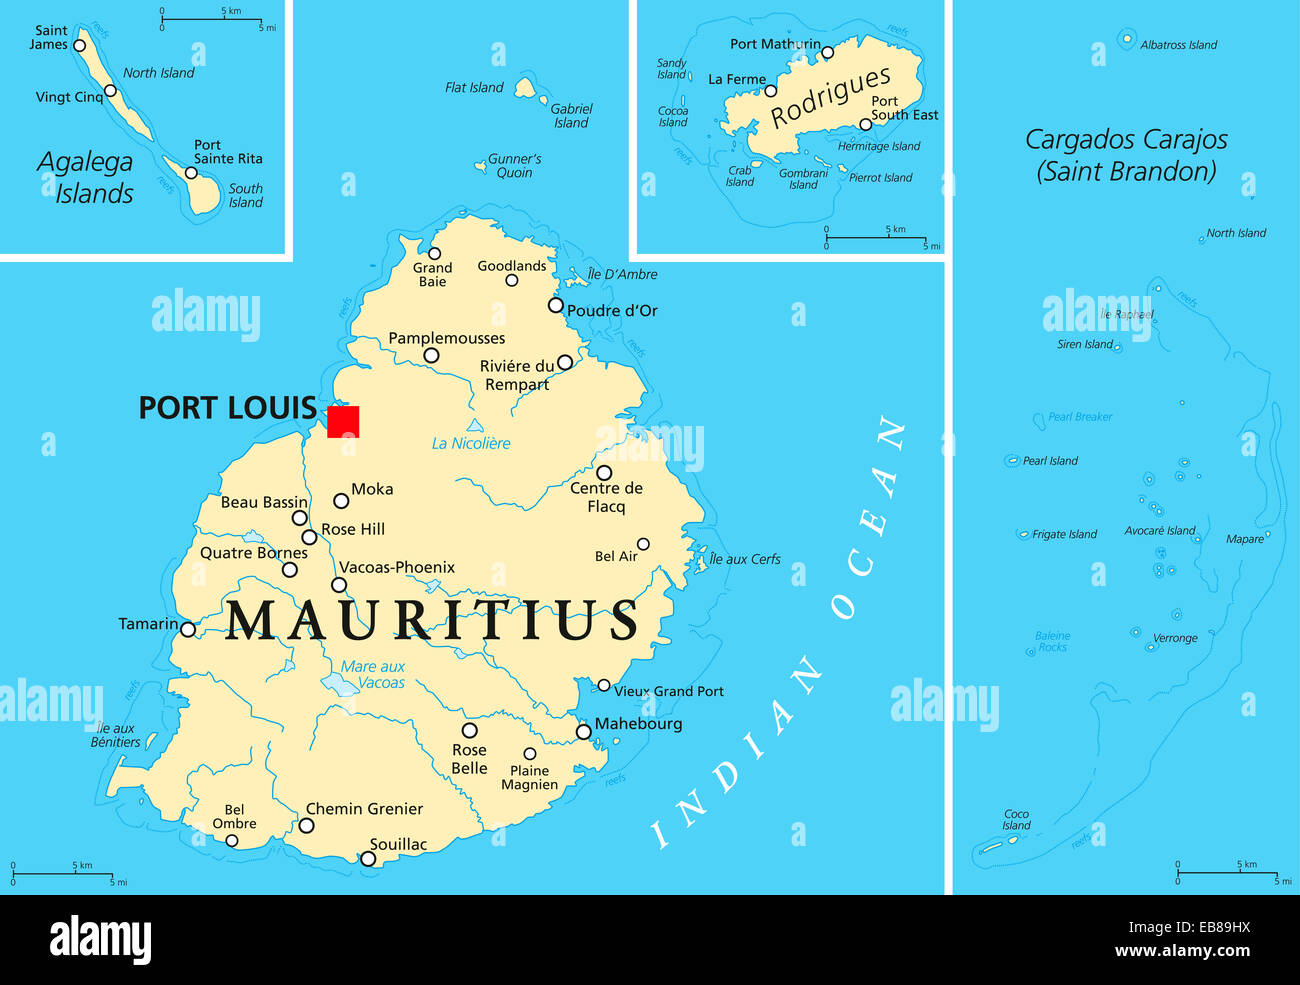 Mauritius Political Map with capital Port Louis, the islands Rodrigues and Agalega and with the archipelago Saint Brandon. Stock Photo